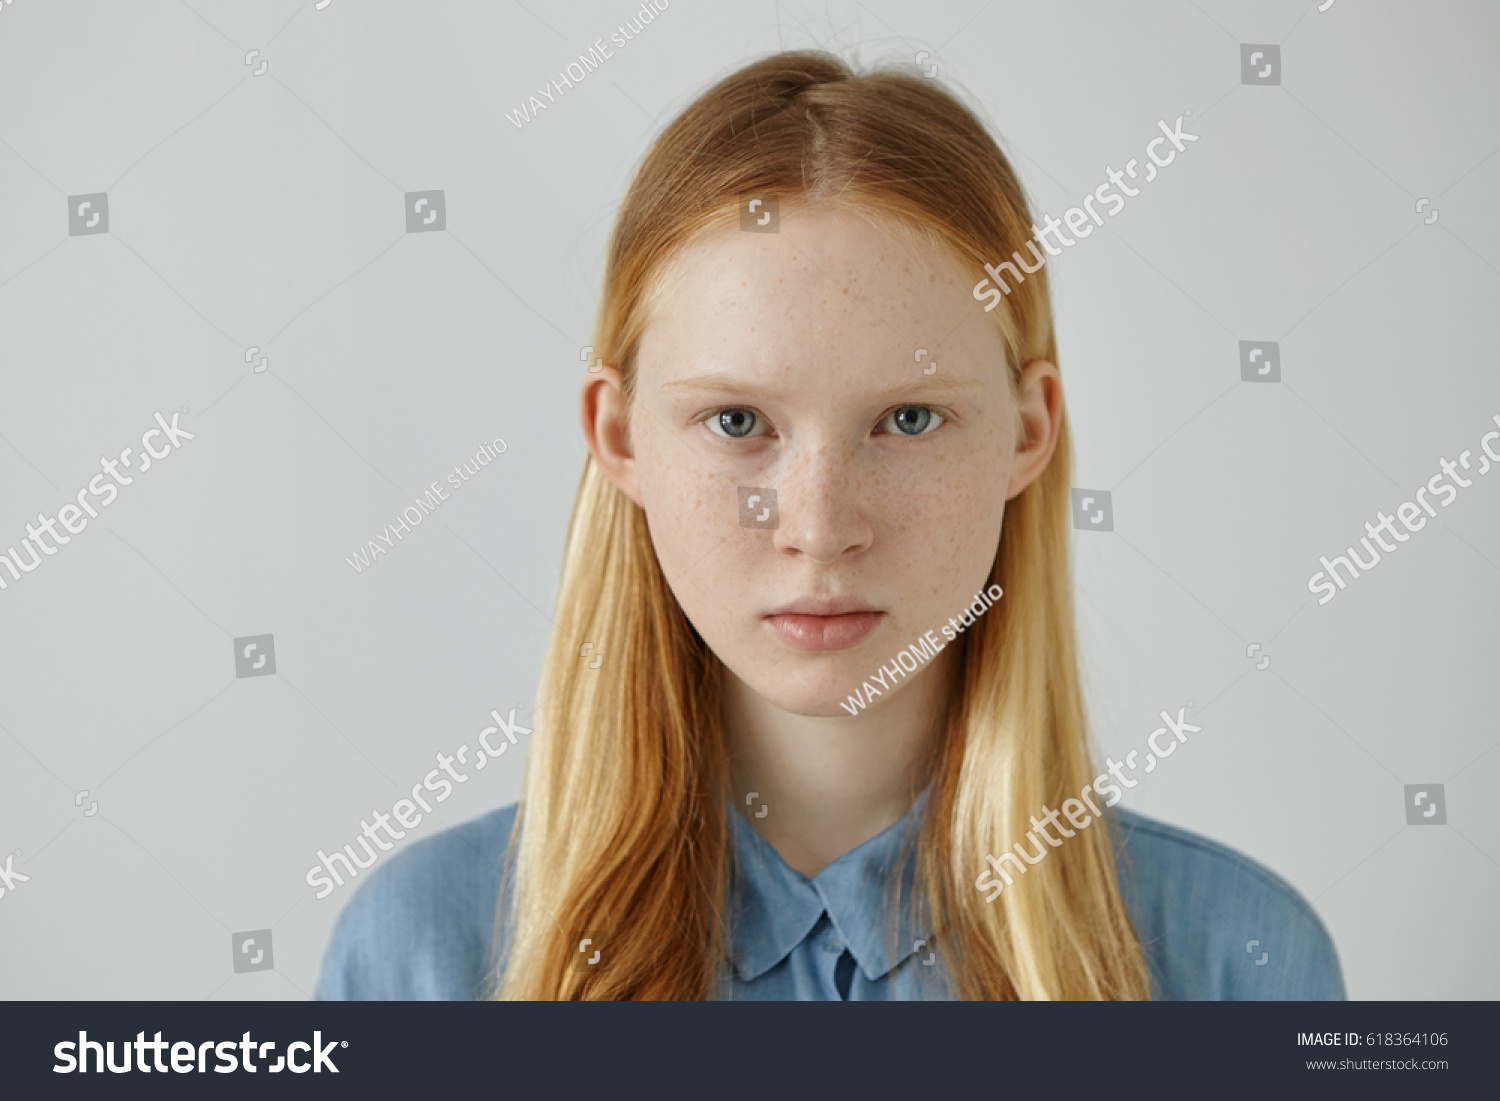 Teen Girls With Freckles